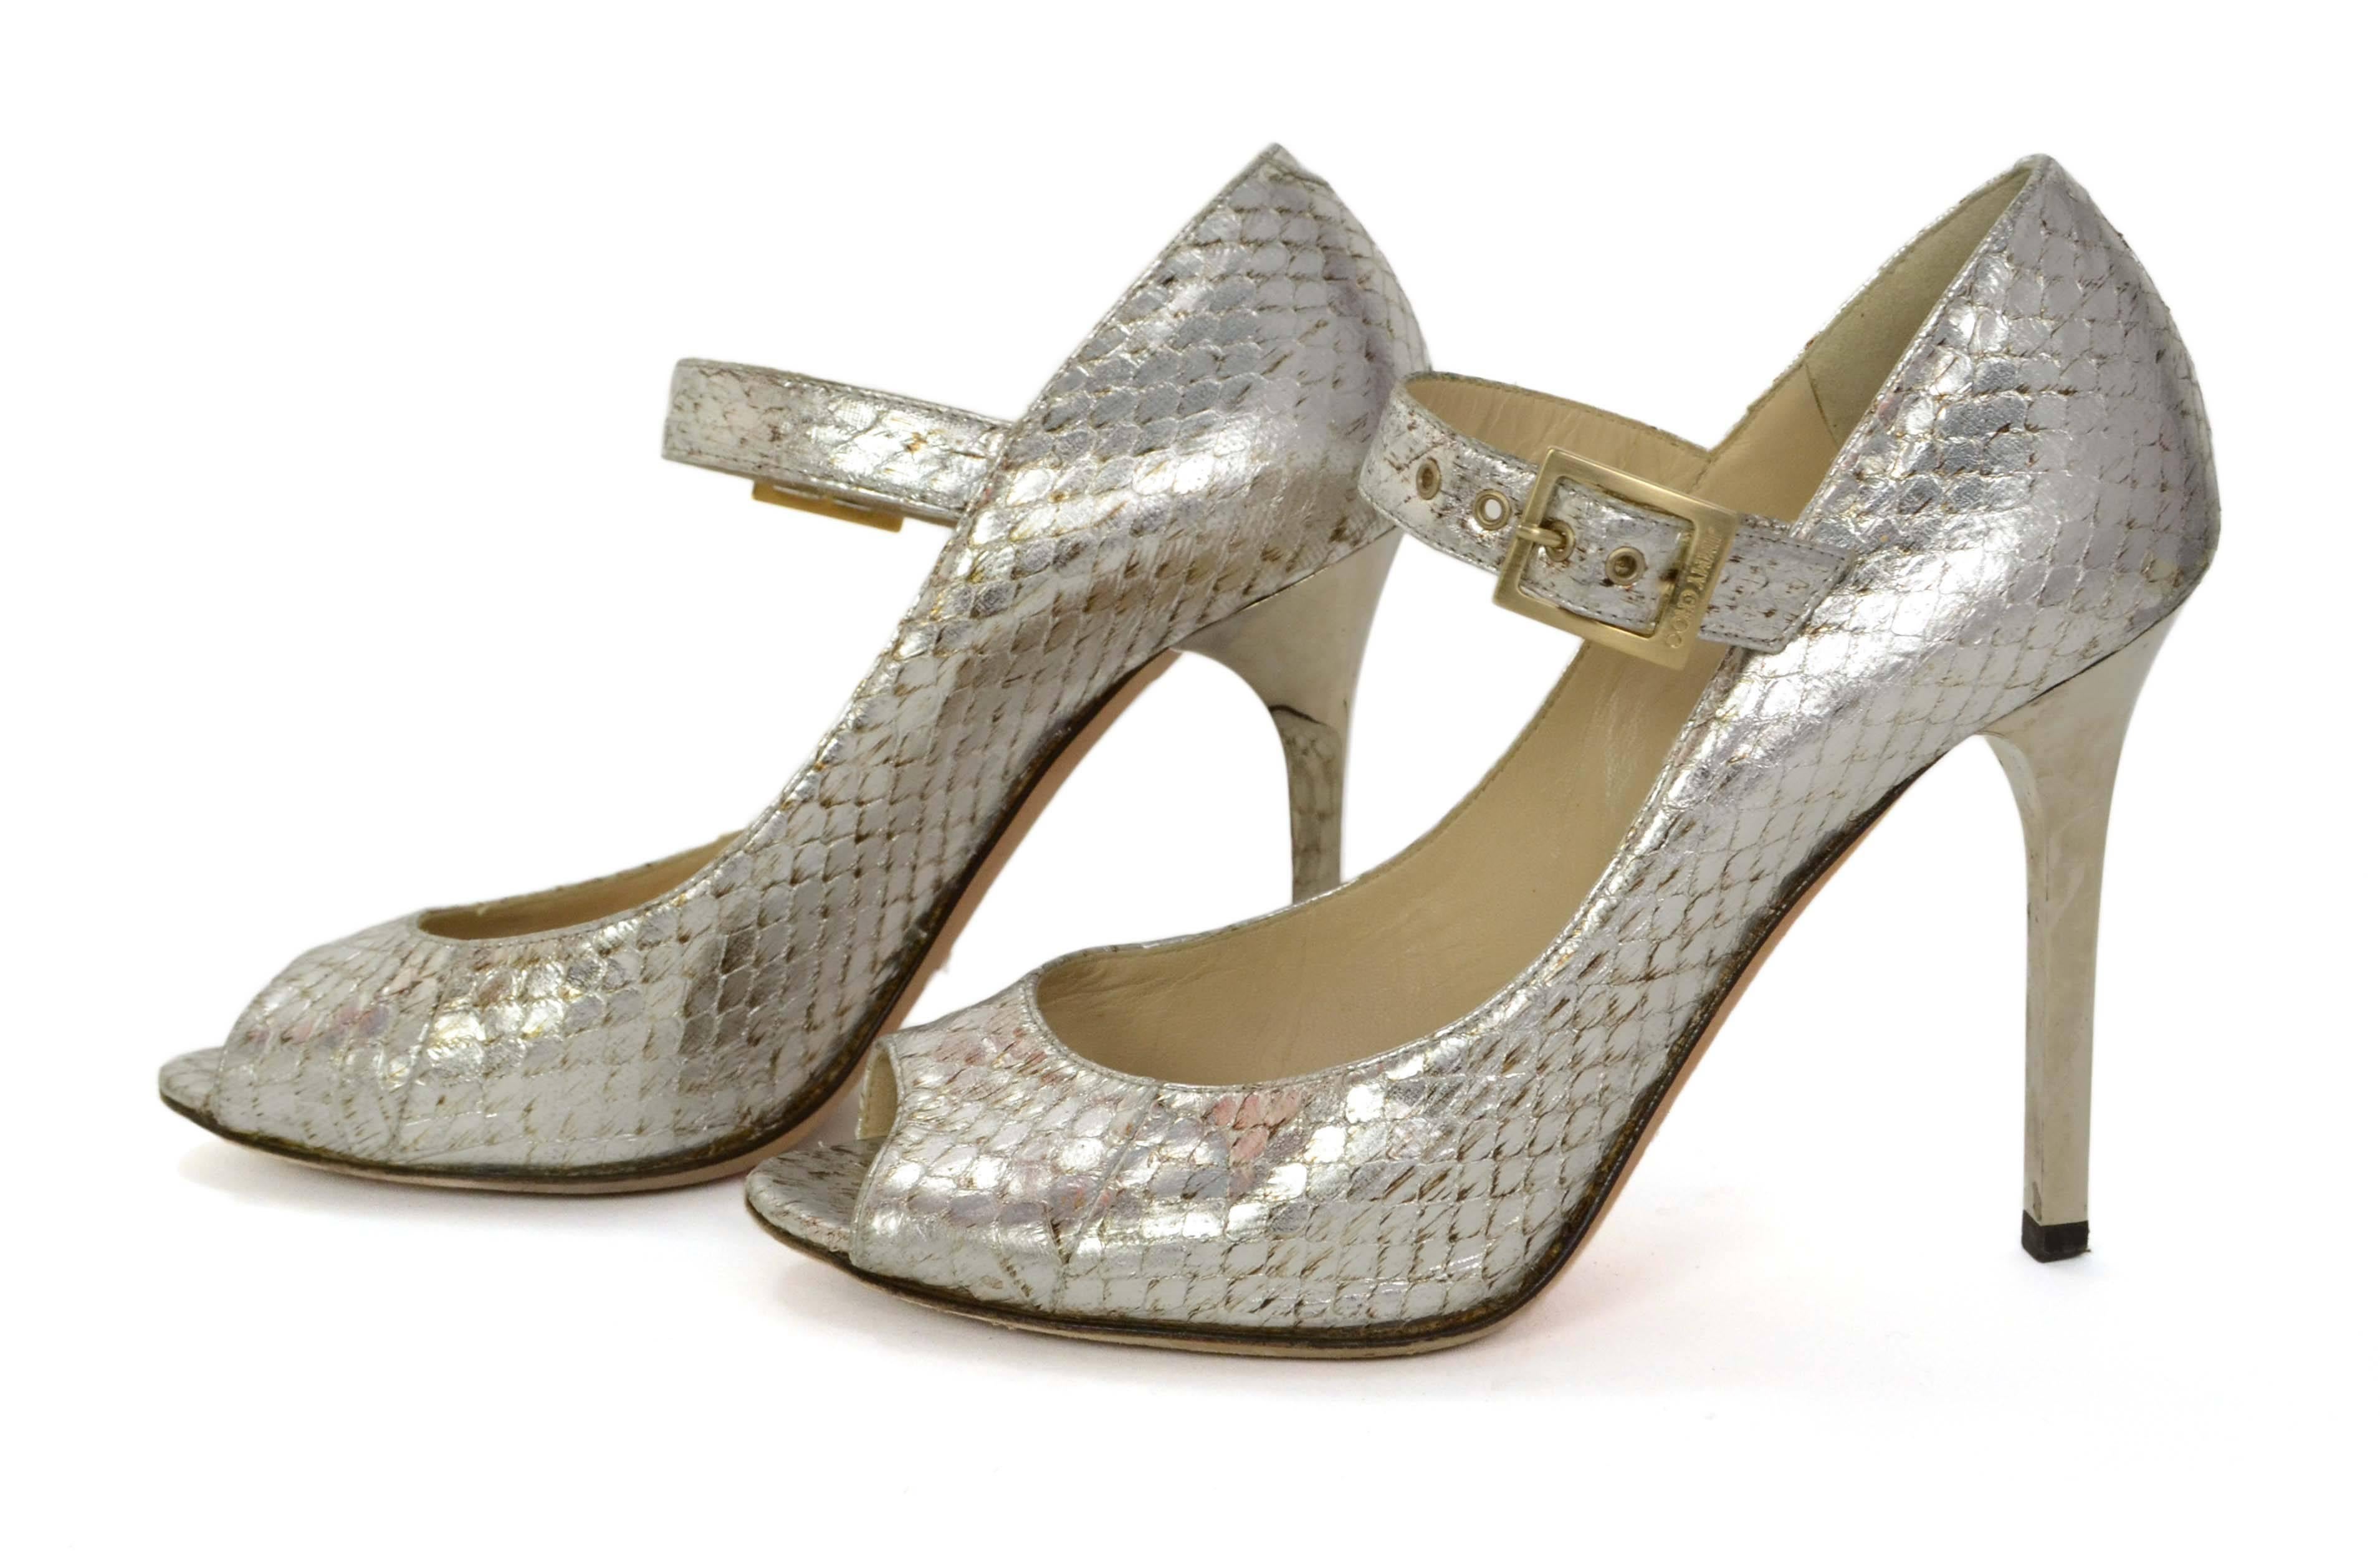 Jimmy Choo Silver Python Peep-Toe Mary Jane Pumps 
Features silver metal rectangular heel
Made In: Italy
Color: Silver
Materials: Python and metal
Closure: Ankle strap with buckle and notch closure
Sole Stamp: Jimmy Choo London Made in Italy